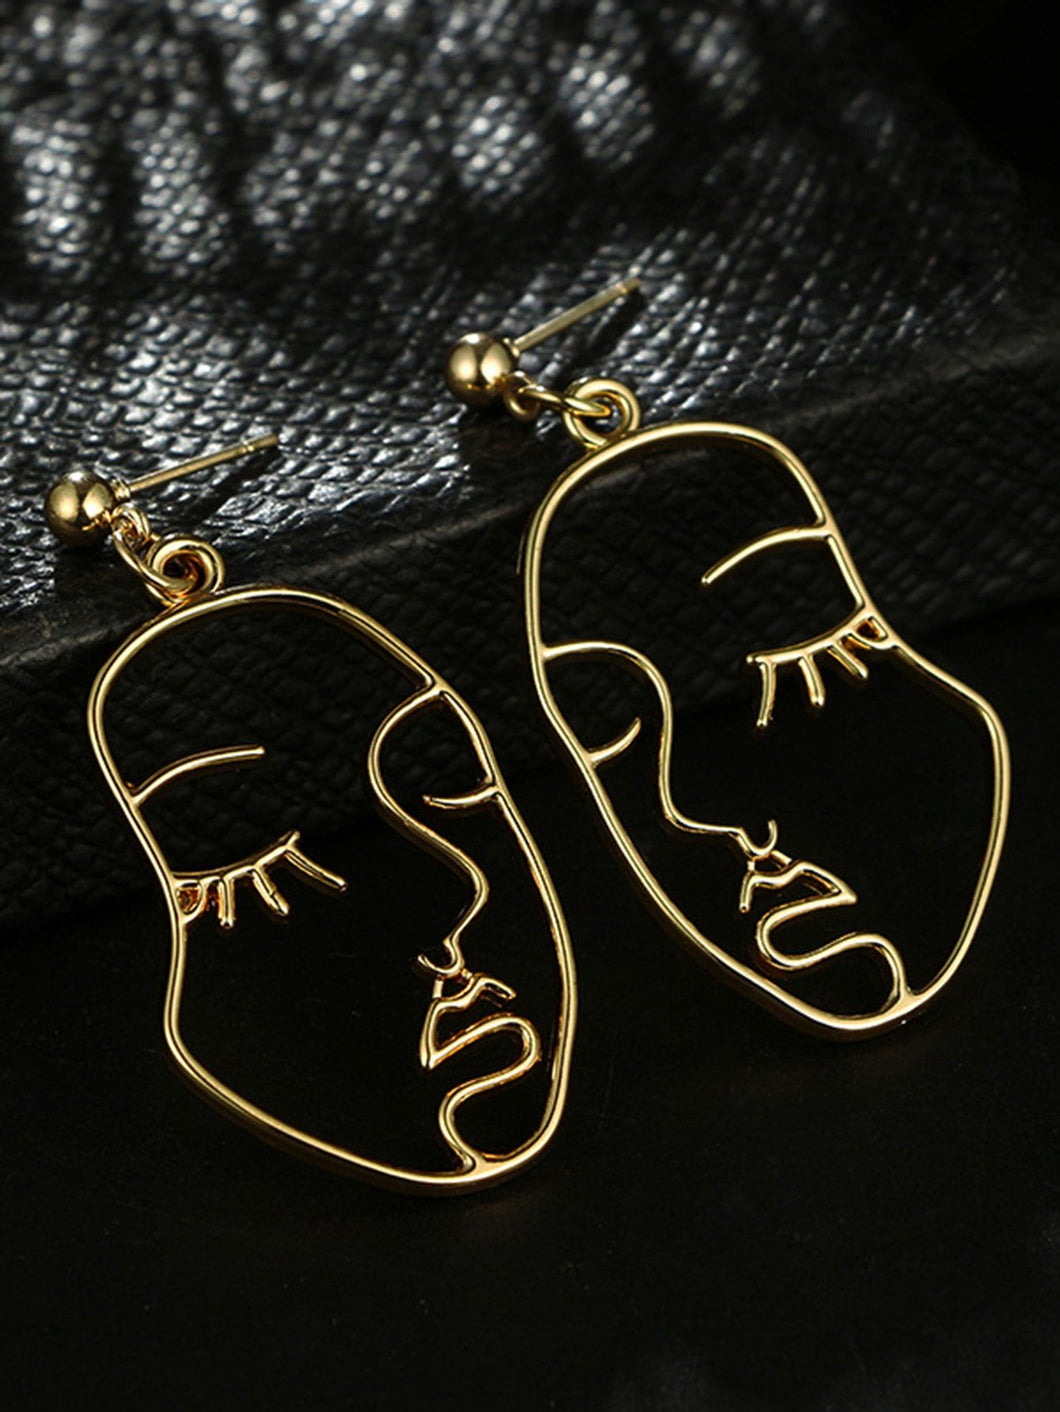 '1 pair of Hollow Face Design Drop Earrings' Highly on trend, this couple of earrings, with a modern graphic figure/face design, are on high demand! Beautiful fashion accessories, it is a perfect gift for earrings lovers or collectors.